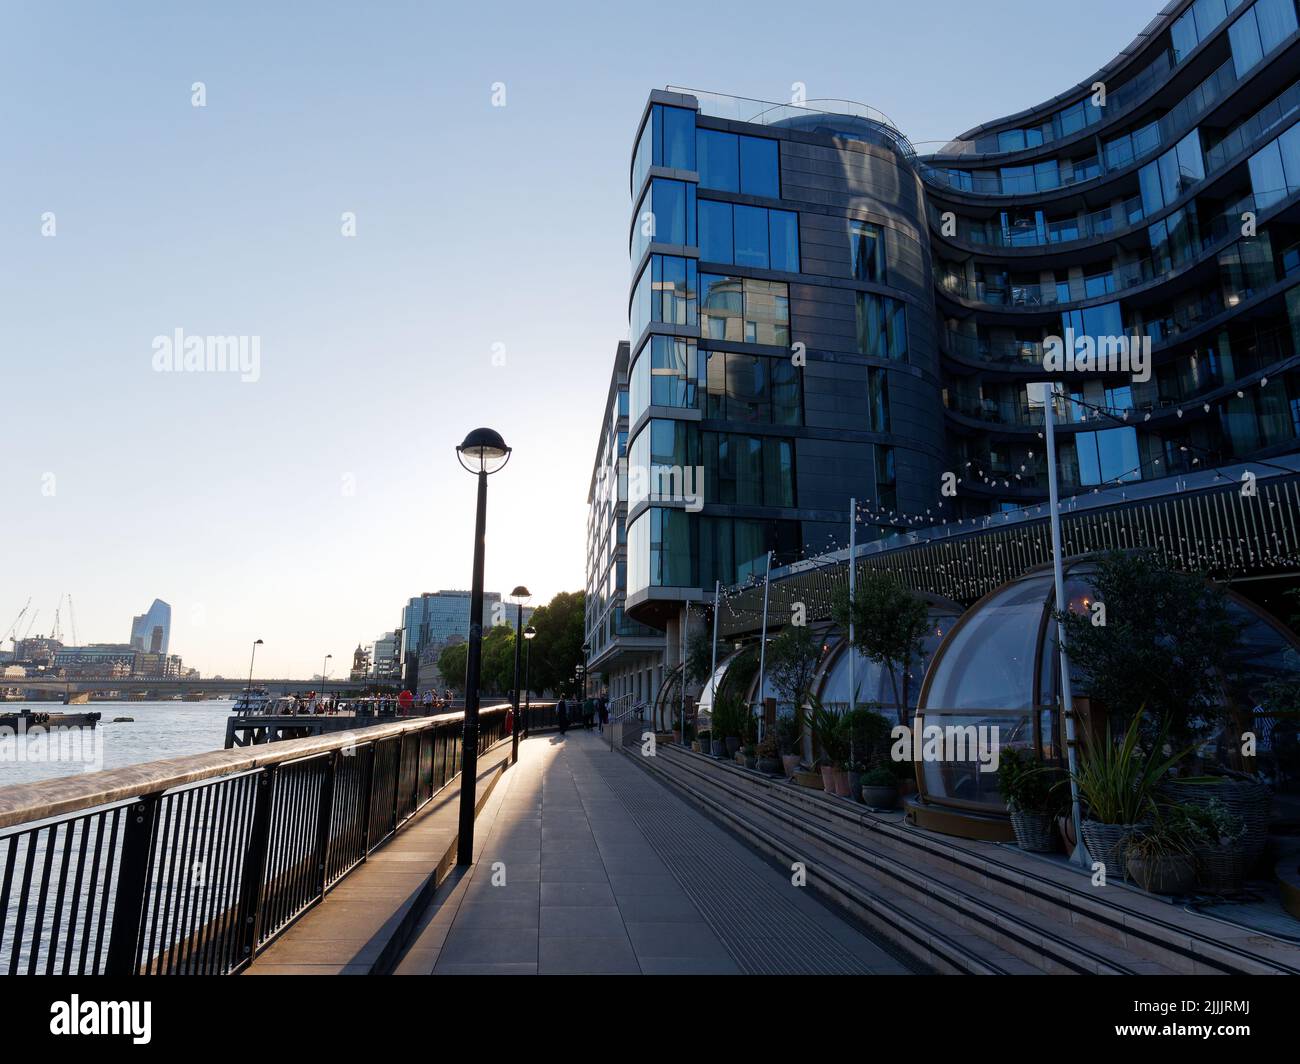 London, Greater London, England, June 22 2022: Apartments and Coppa Club restaurant Igloos on the north bank riverbank of the River Thames. Stock Photo